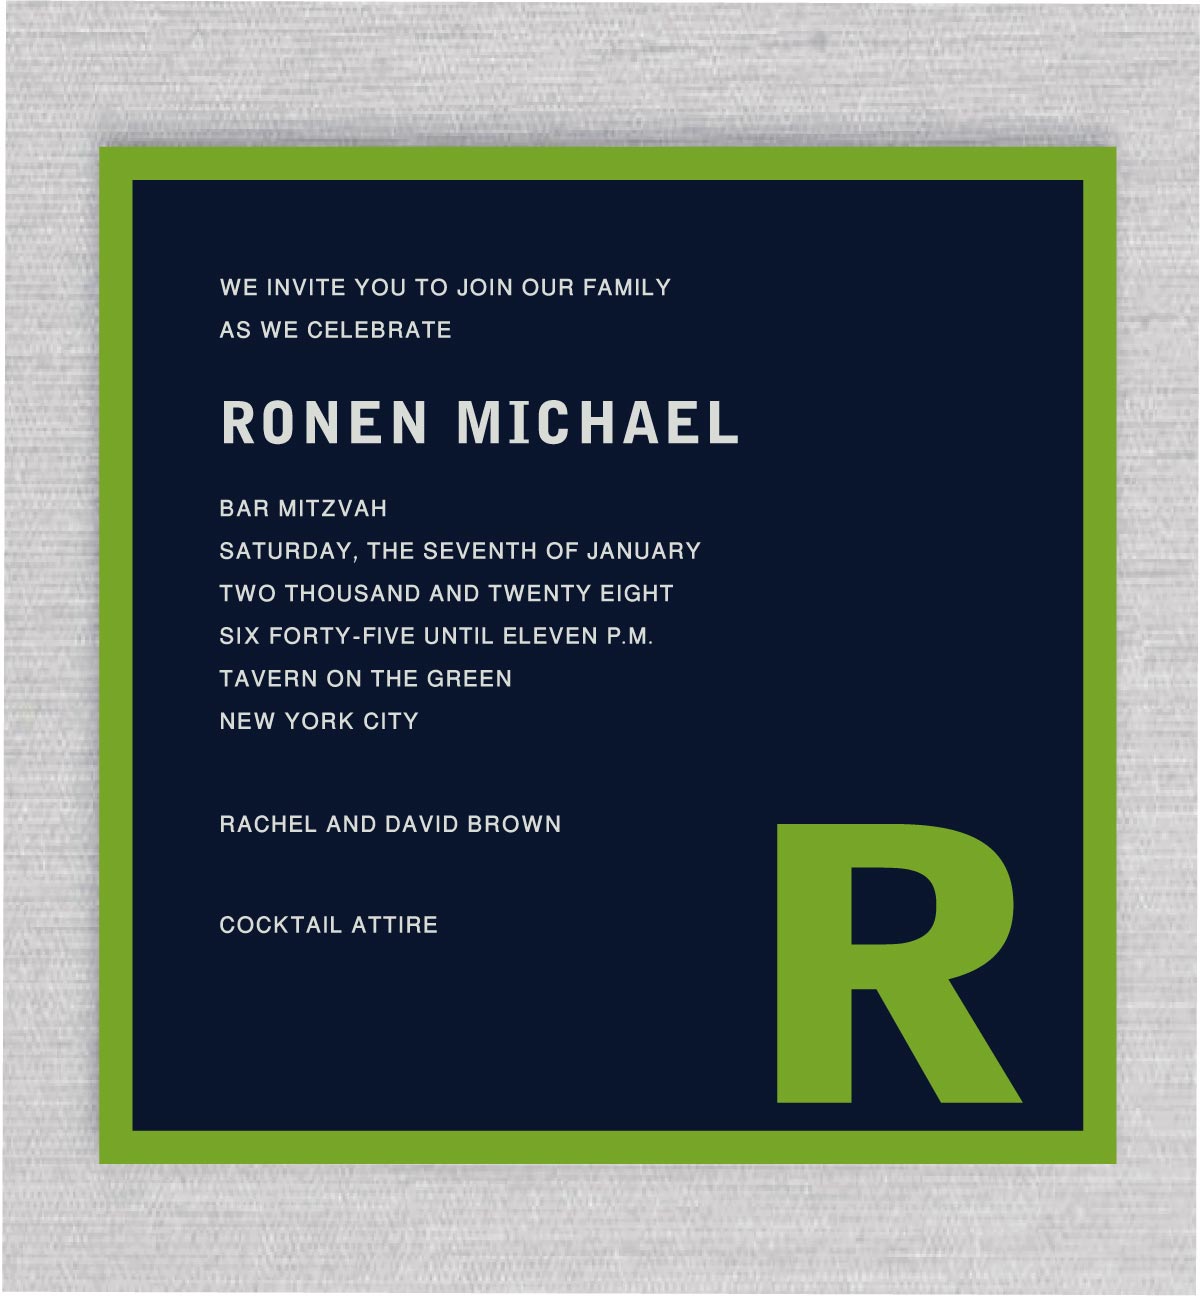 Modern and casual, this Contemporary Bar Mitzvah Invitation. The color scheme - navy and green - lights up your celebration details!